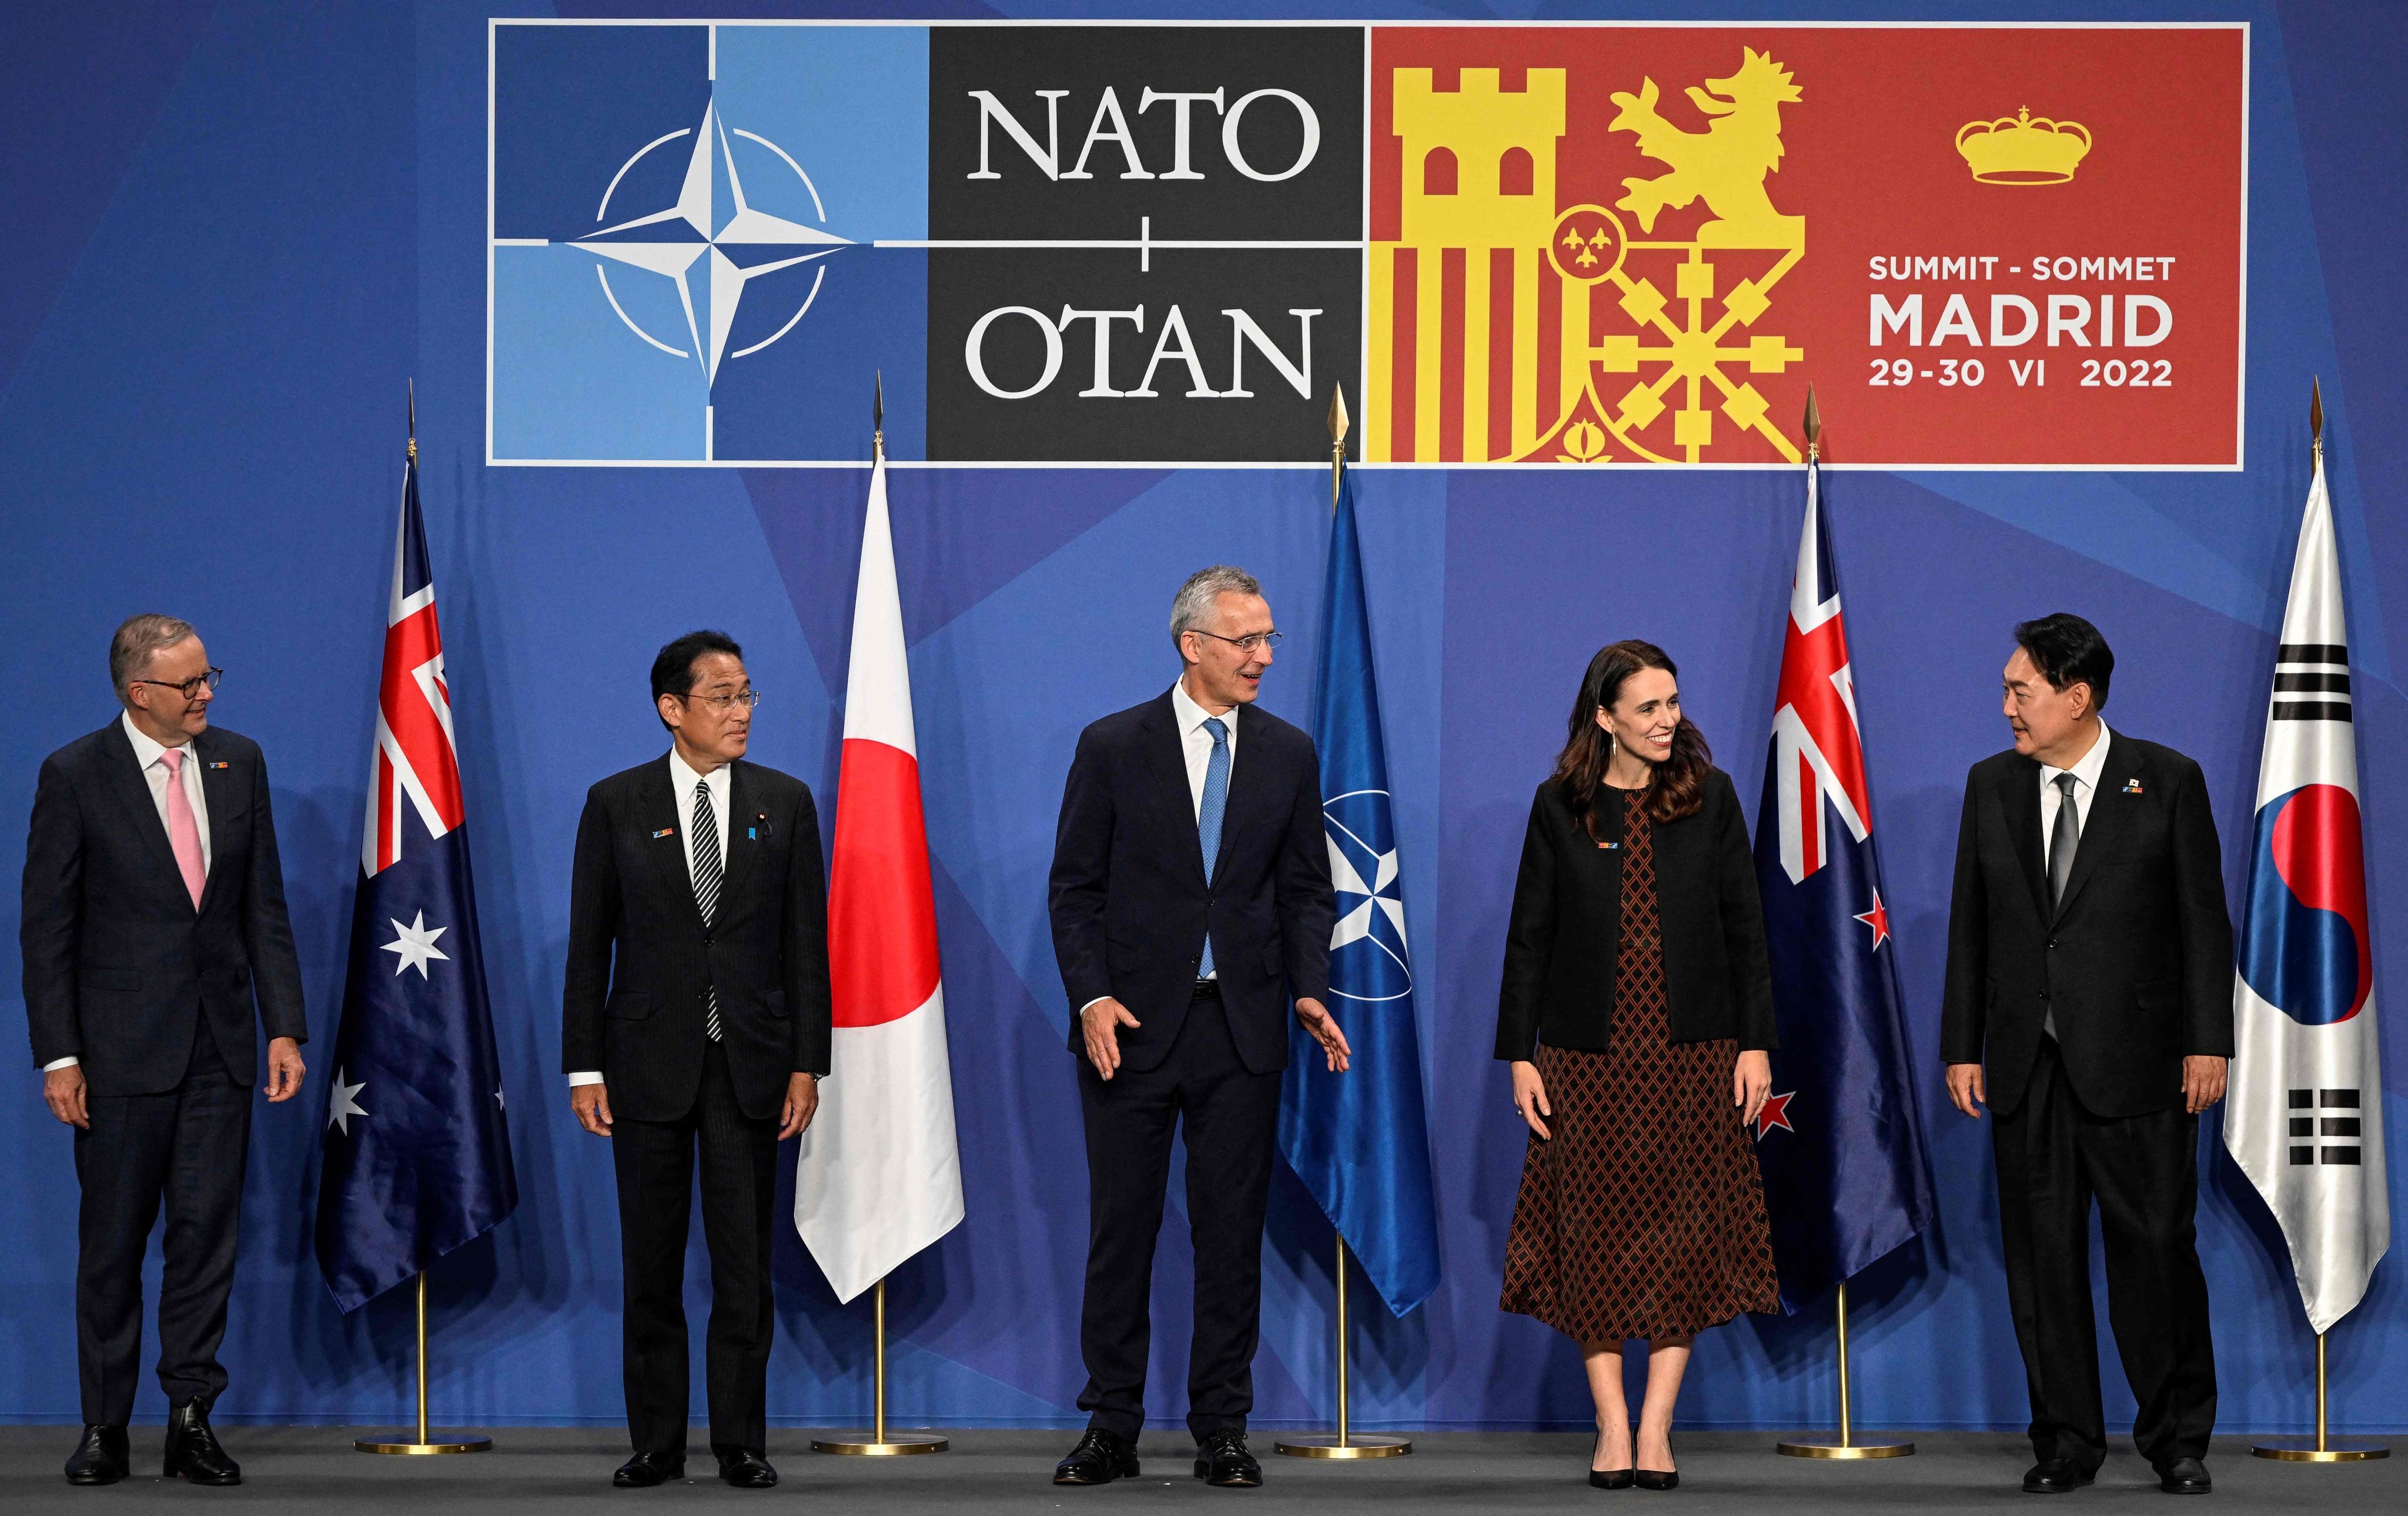 Nato has been drawing closer to the “Asia-Pacific 4” – Australia, Japan, New Zealand and South Korea – whose leaders, seen here with Nato Secretary General Jens Stoltenberg (centre), attended its summit in Madrid last year. Photo: AFP